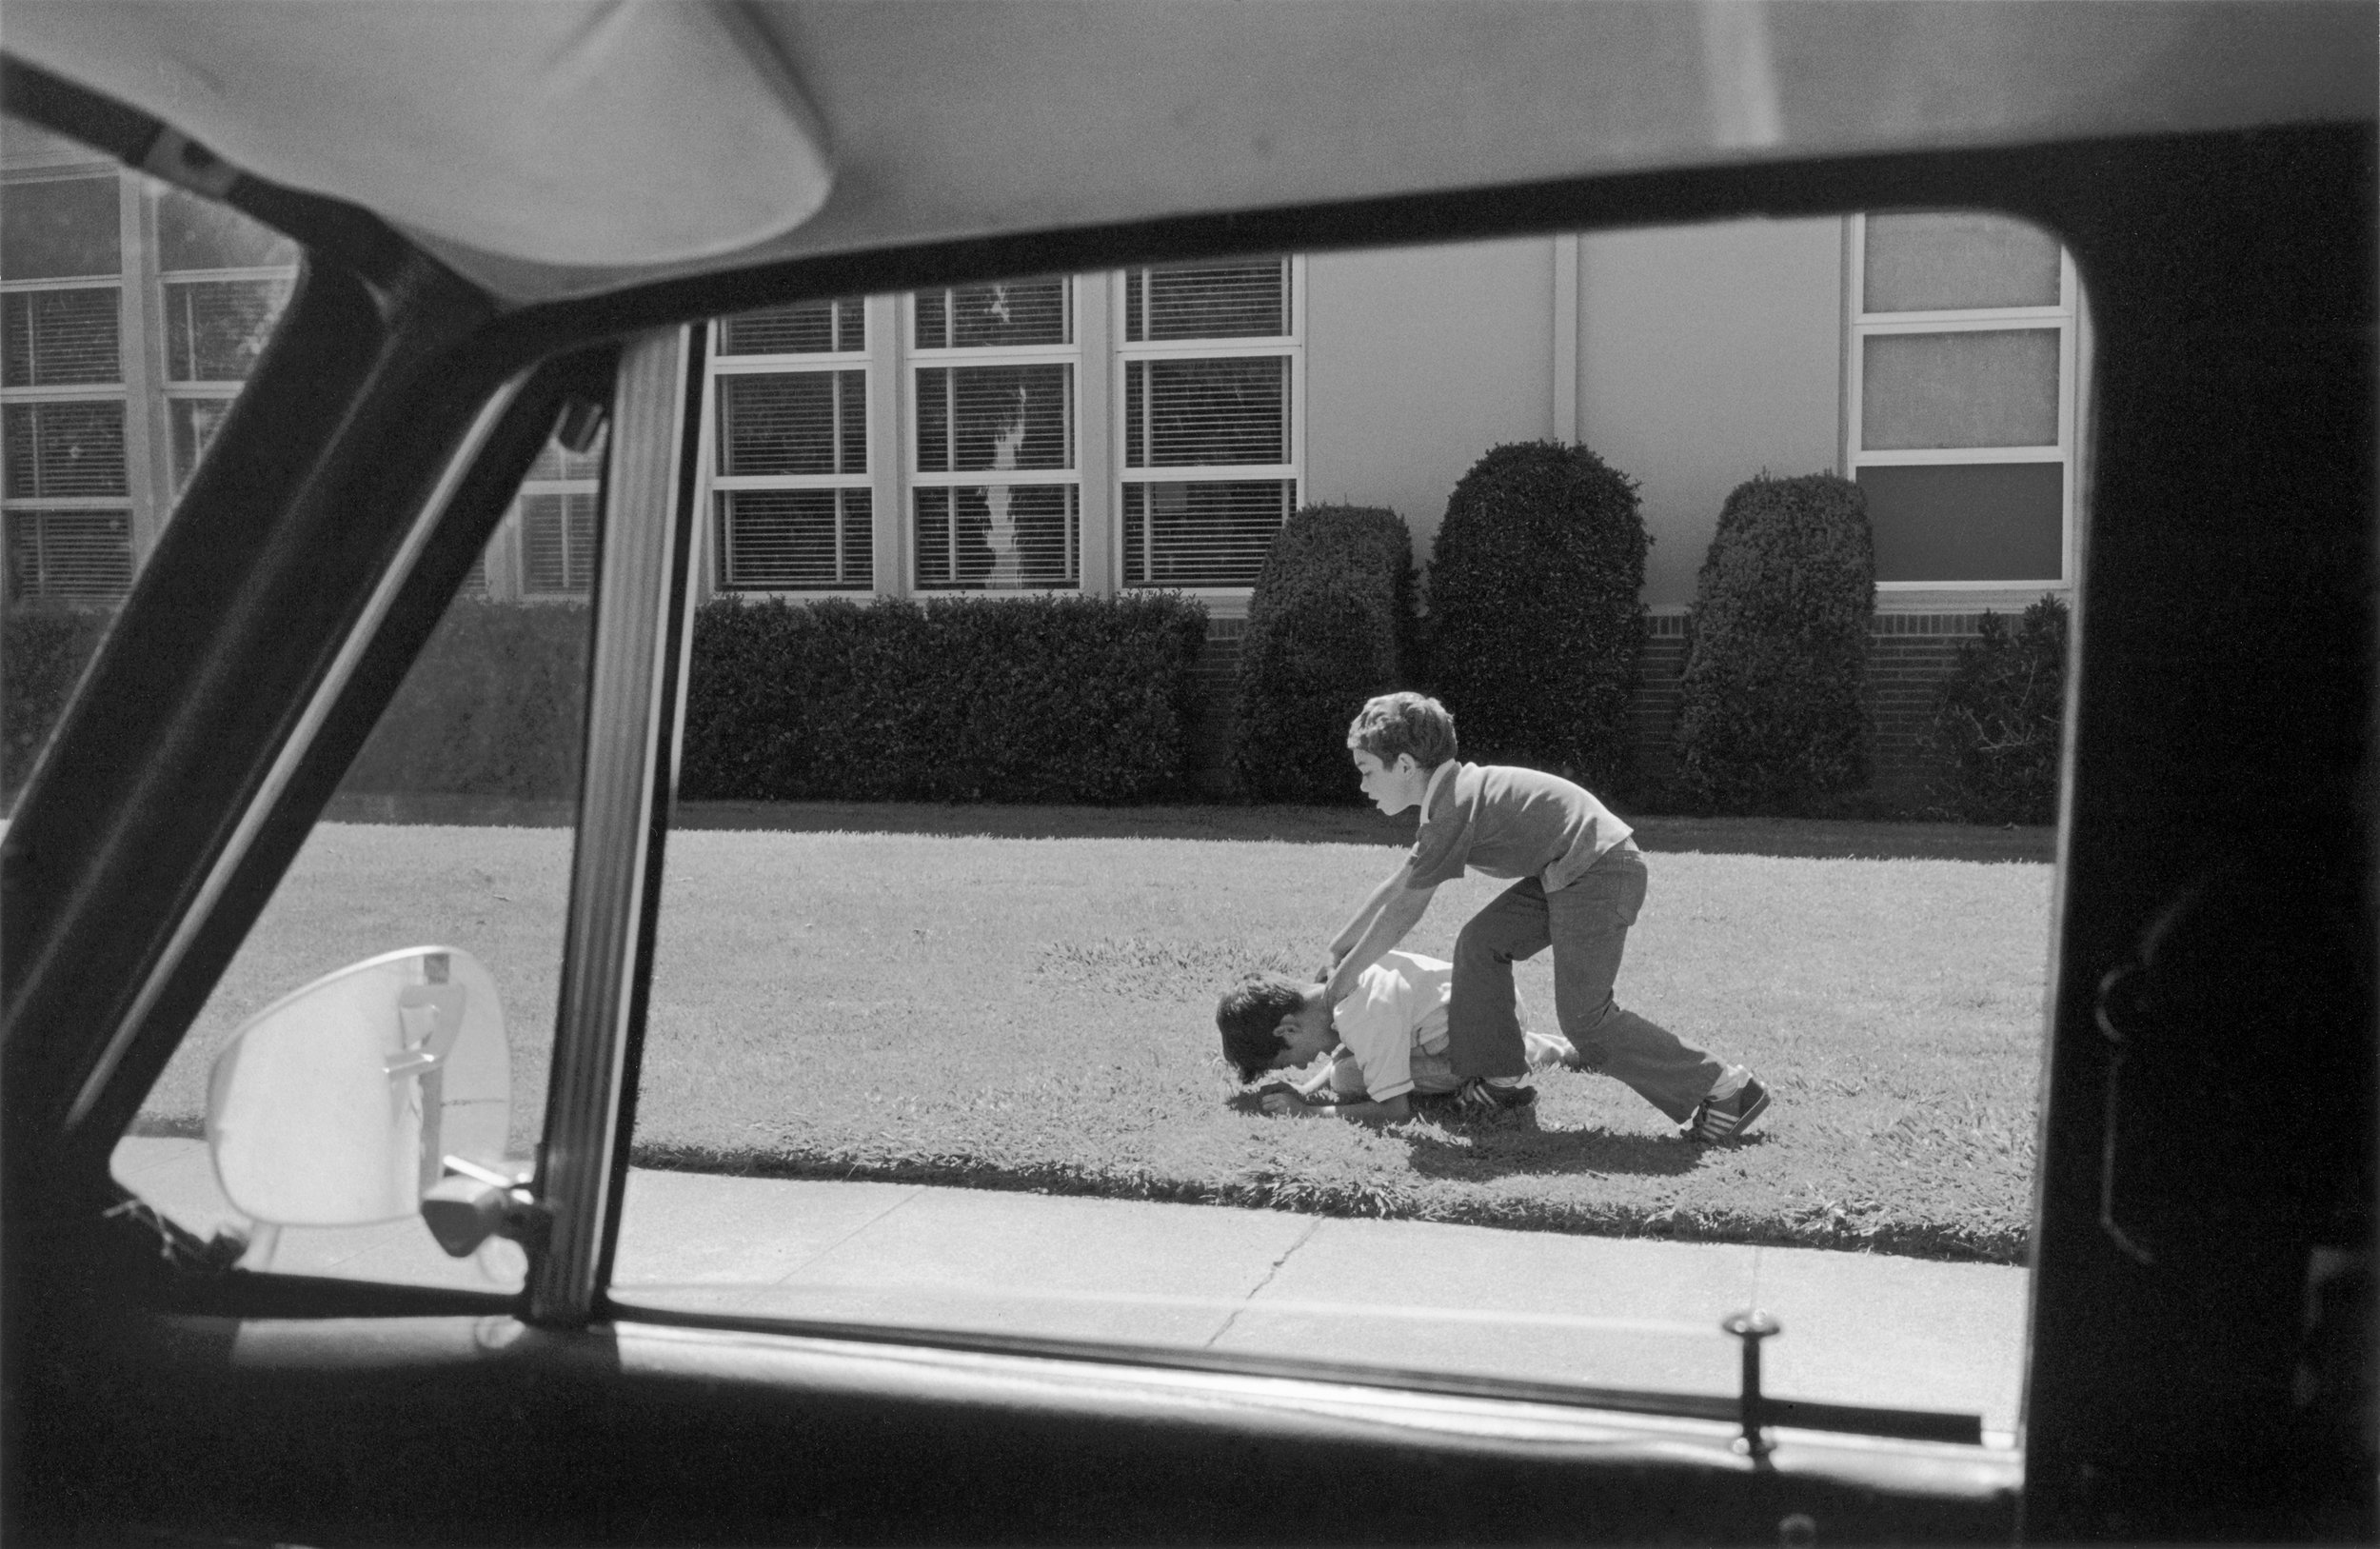  Henry Wessel Incident No.6 De la série Incidents, 2012 © Henry Wessel; courtesy Pace/MacGill Gallery, New York 